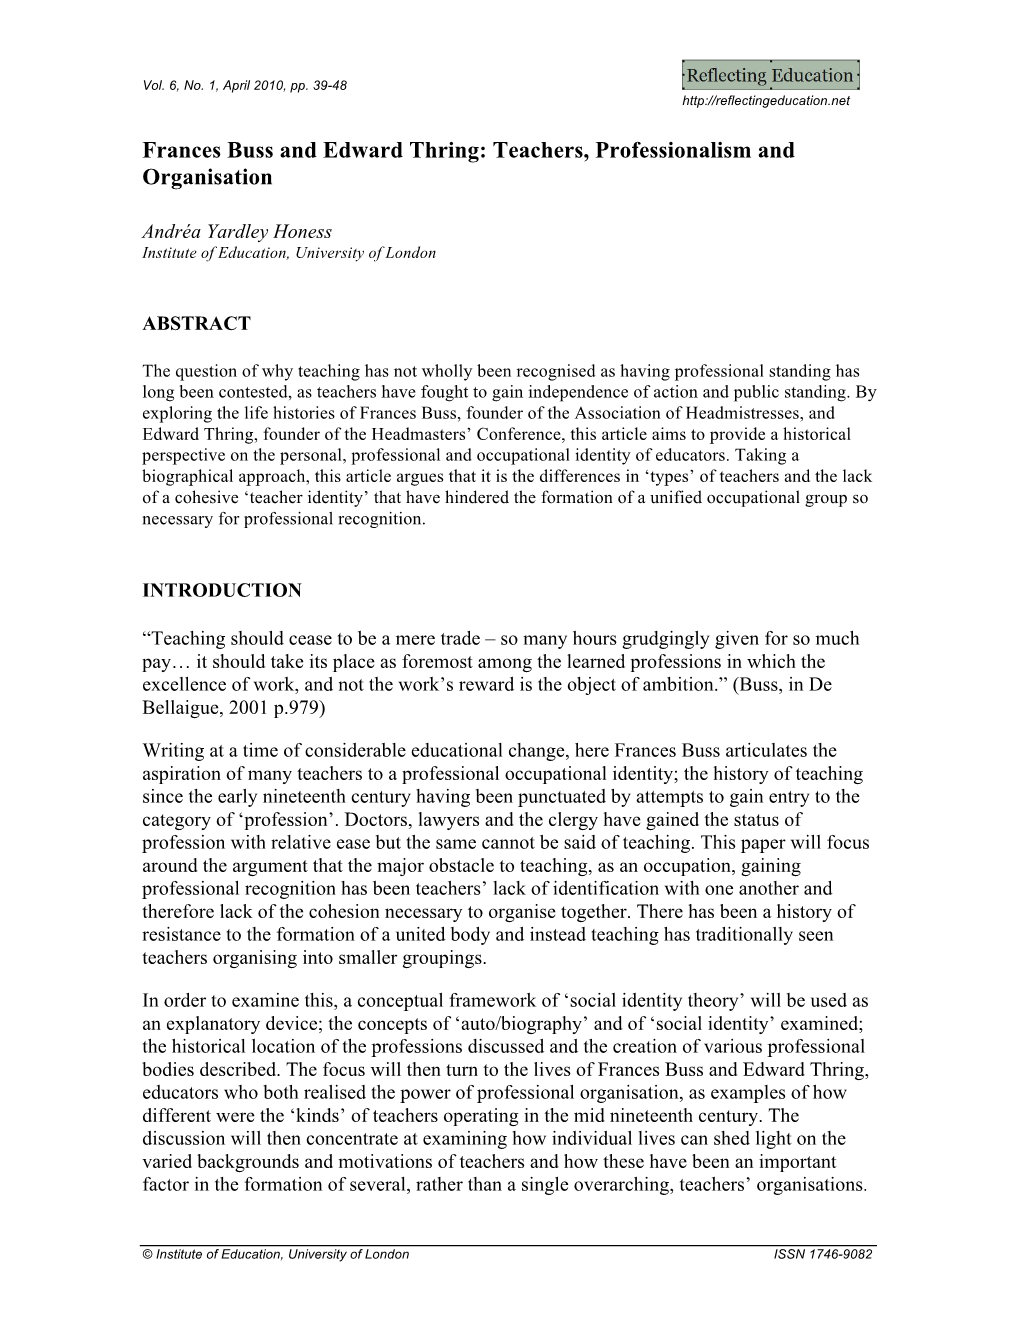 Frances Buss and Edward Thring: Teachers, Professionalism and Organisation